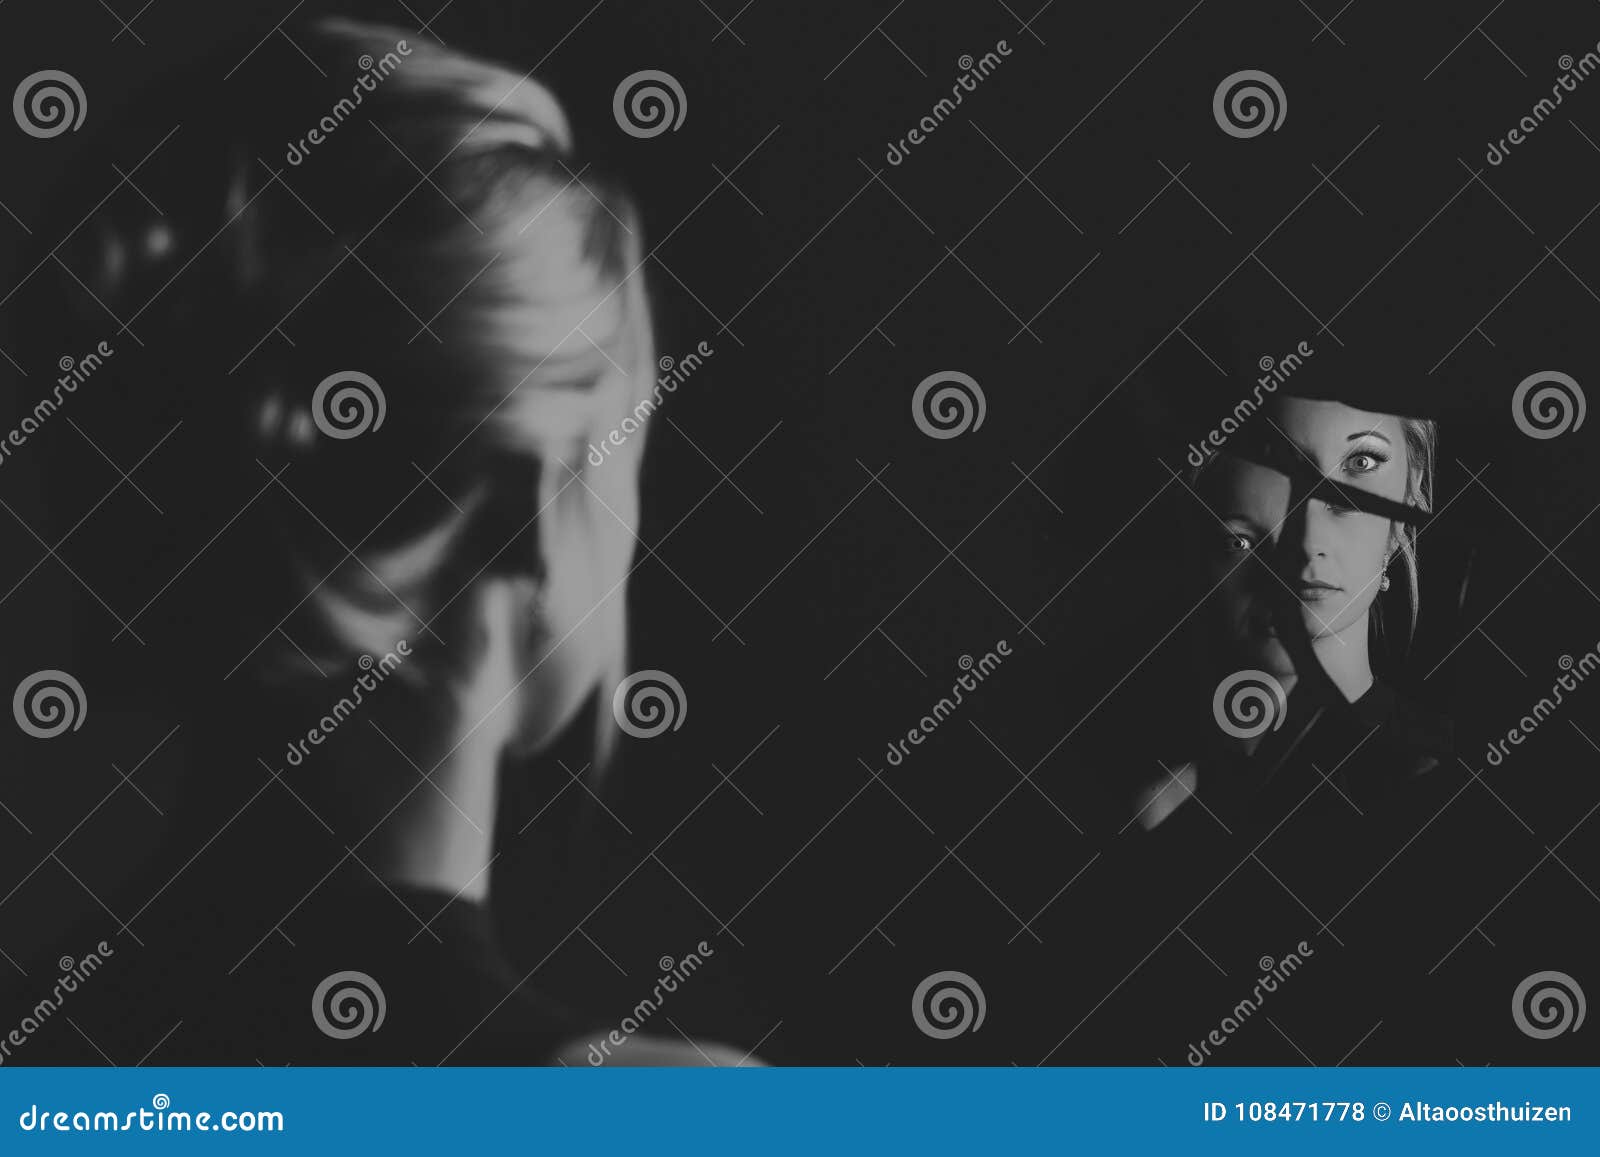 woman looking at her face in shards of broken mirror artistic co